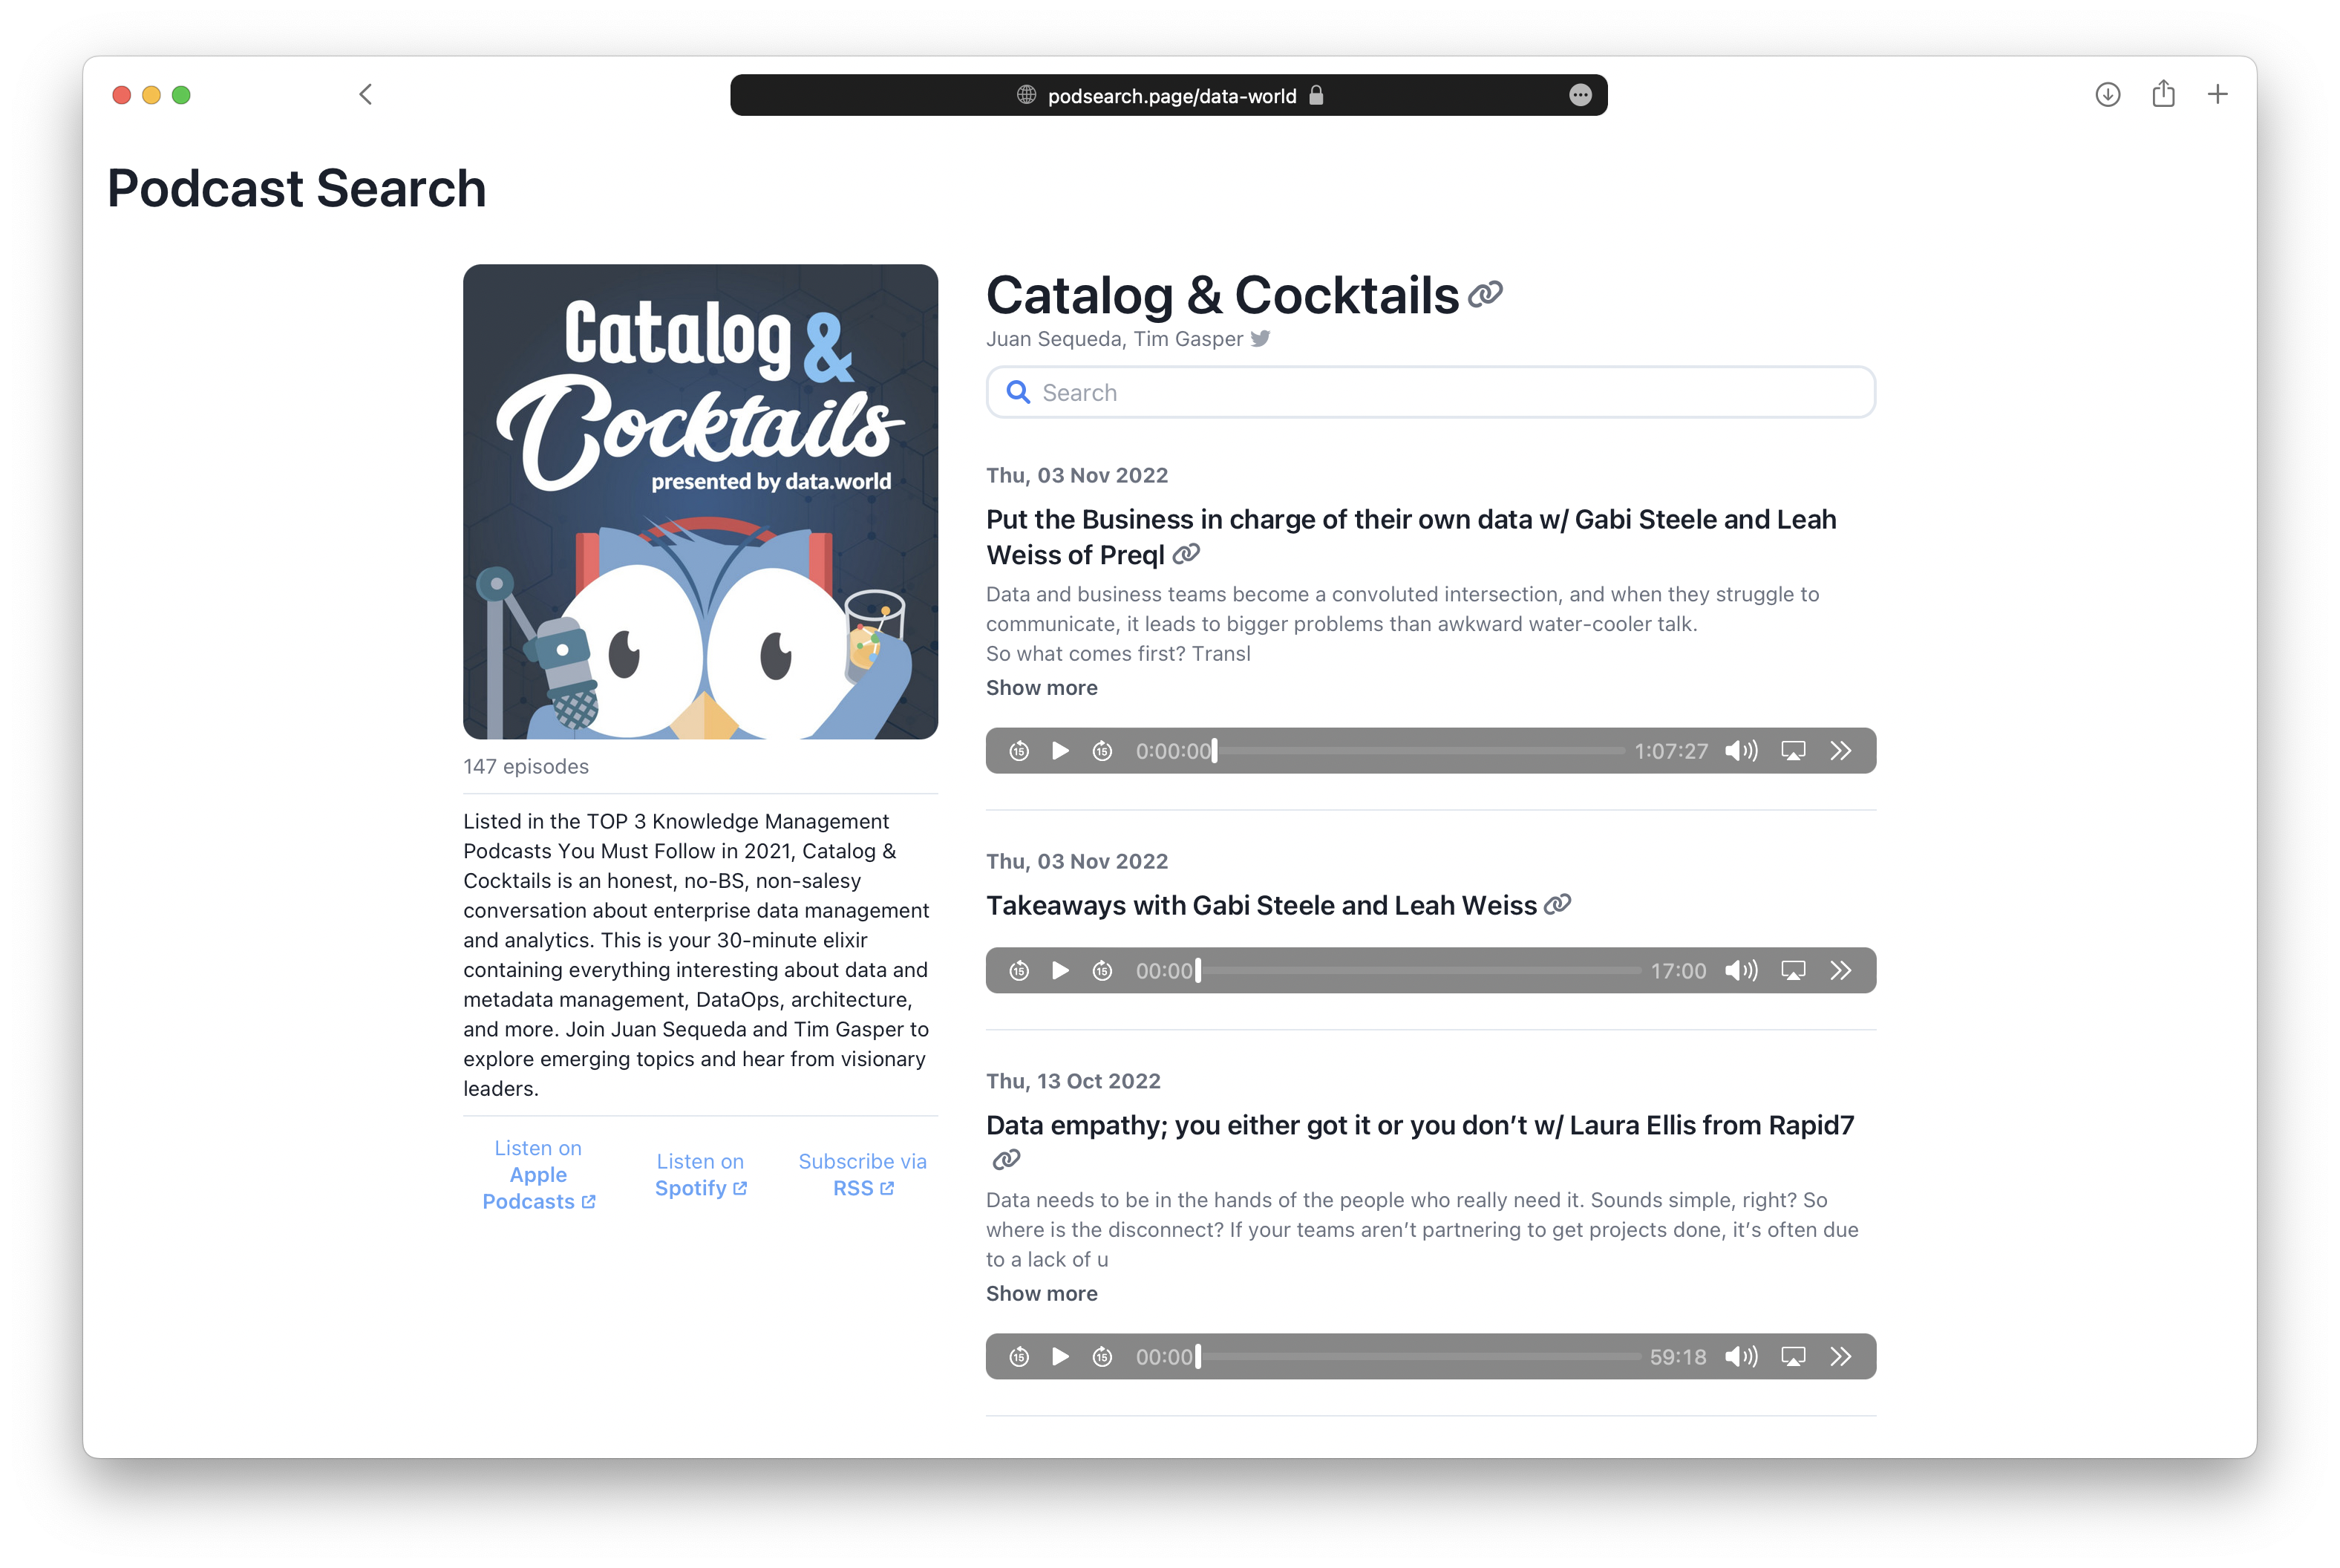 Catalog & Cocktails Podcast Search